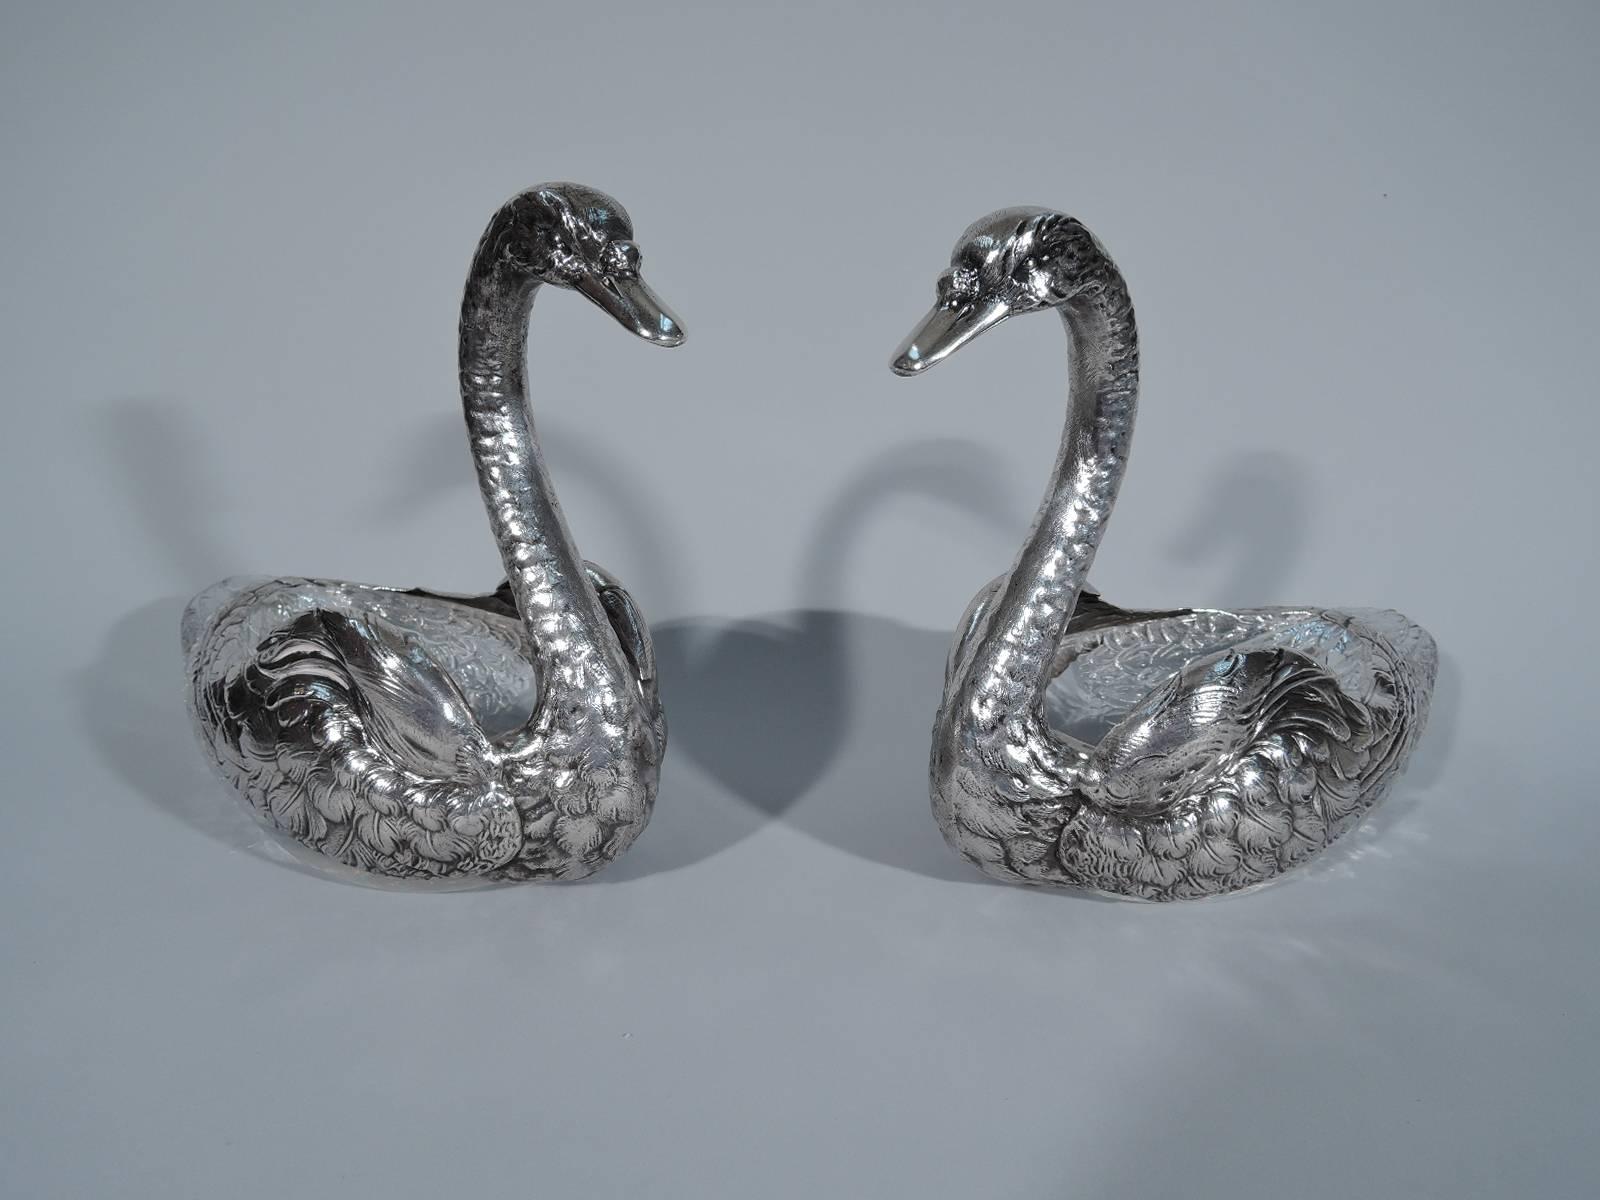 Pair of large American sterling silver and glass swans, circa 1900. Each cut-glass body mounted with silver wings, neck, and head. Finely delineated plumage. Neck and head shapely with closed bill and beady eyes. Hollow for holding
flowers or